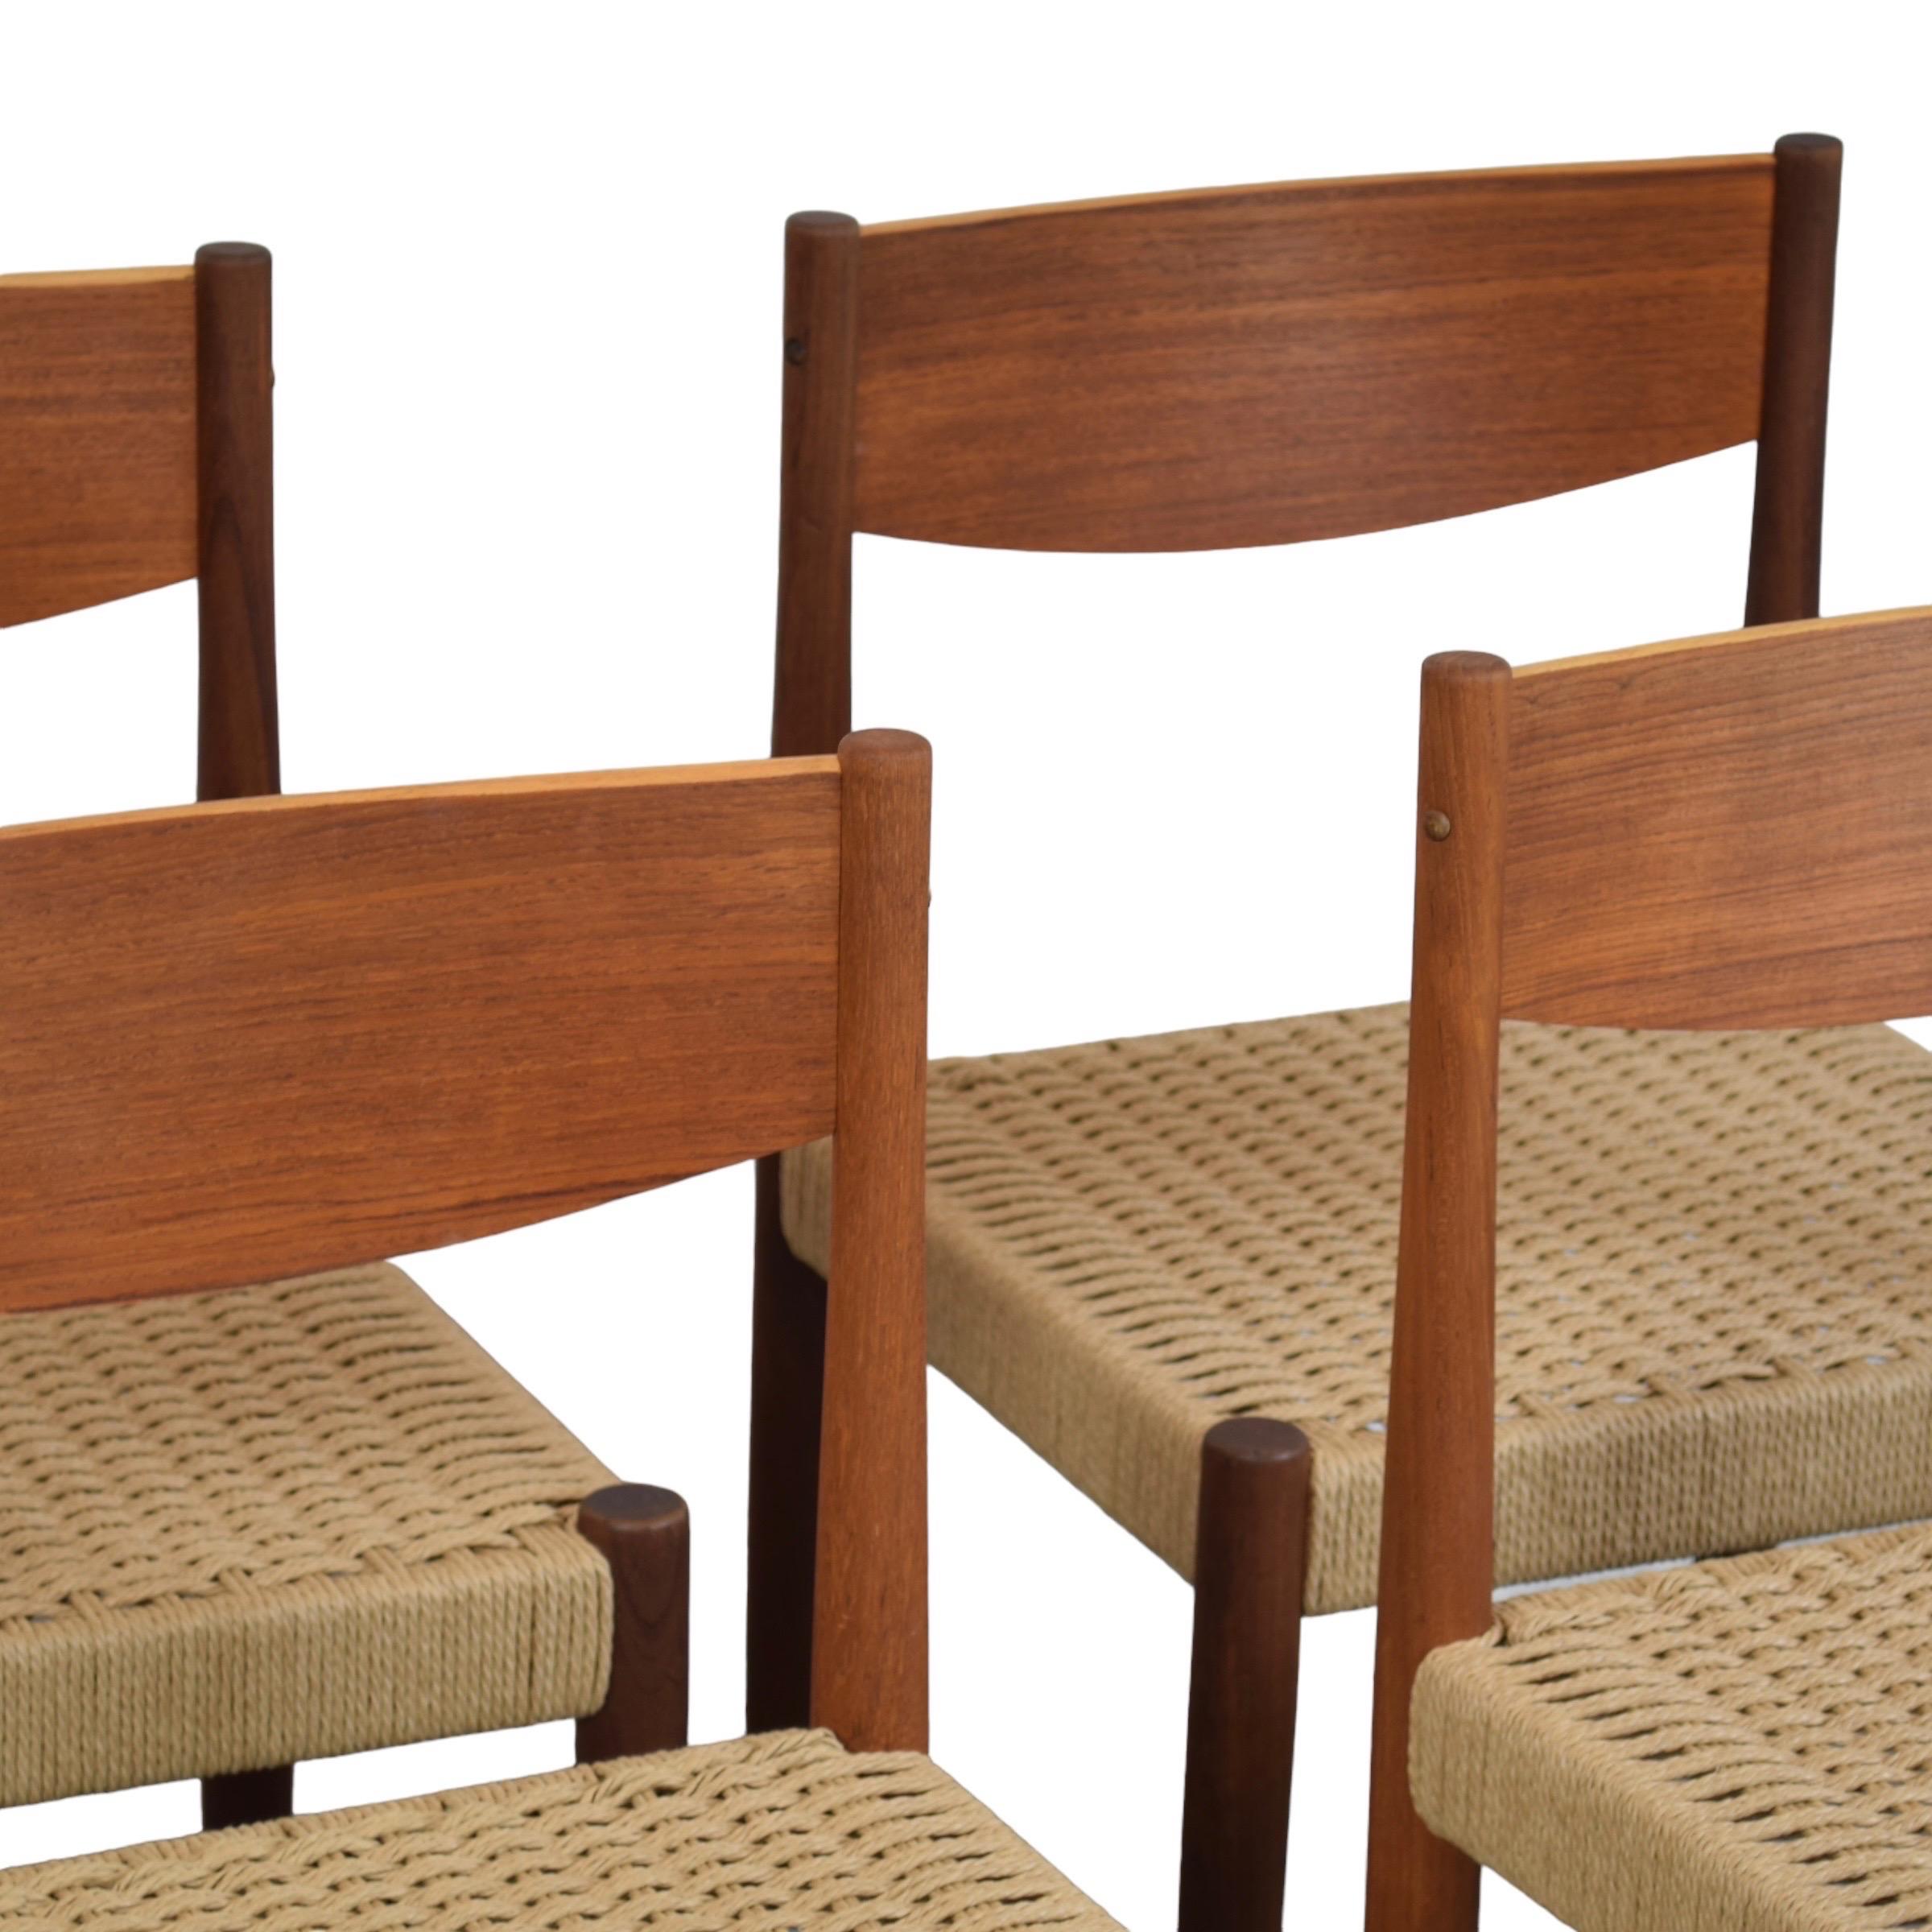 Condition: Refinished & Re-corded

Dimensions: 18.5” L x 18.5” D x 31” H (17” SH)

Description: A set of 4 vintage teak dining chairs by Poul Volther. Made in Denmark, circa 1960s. Freshly re-corded in Danish paper cord. Frames have been refinished